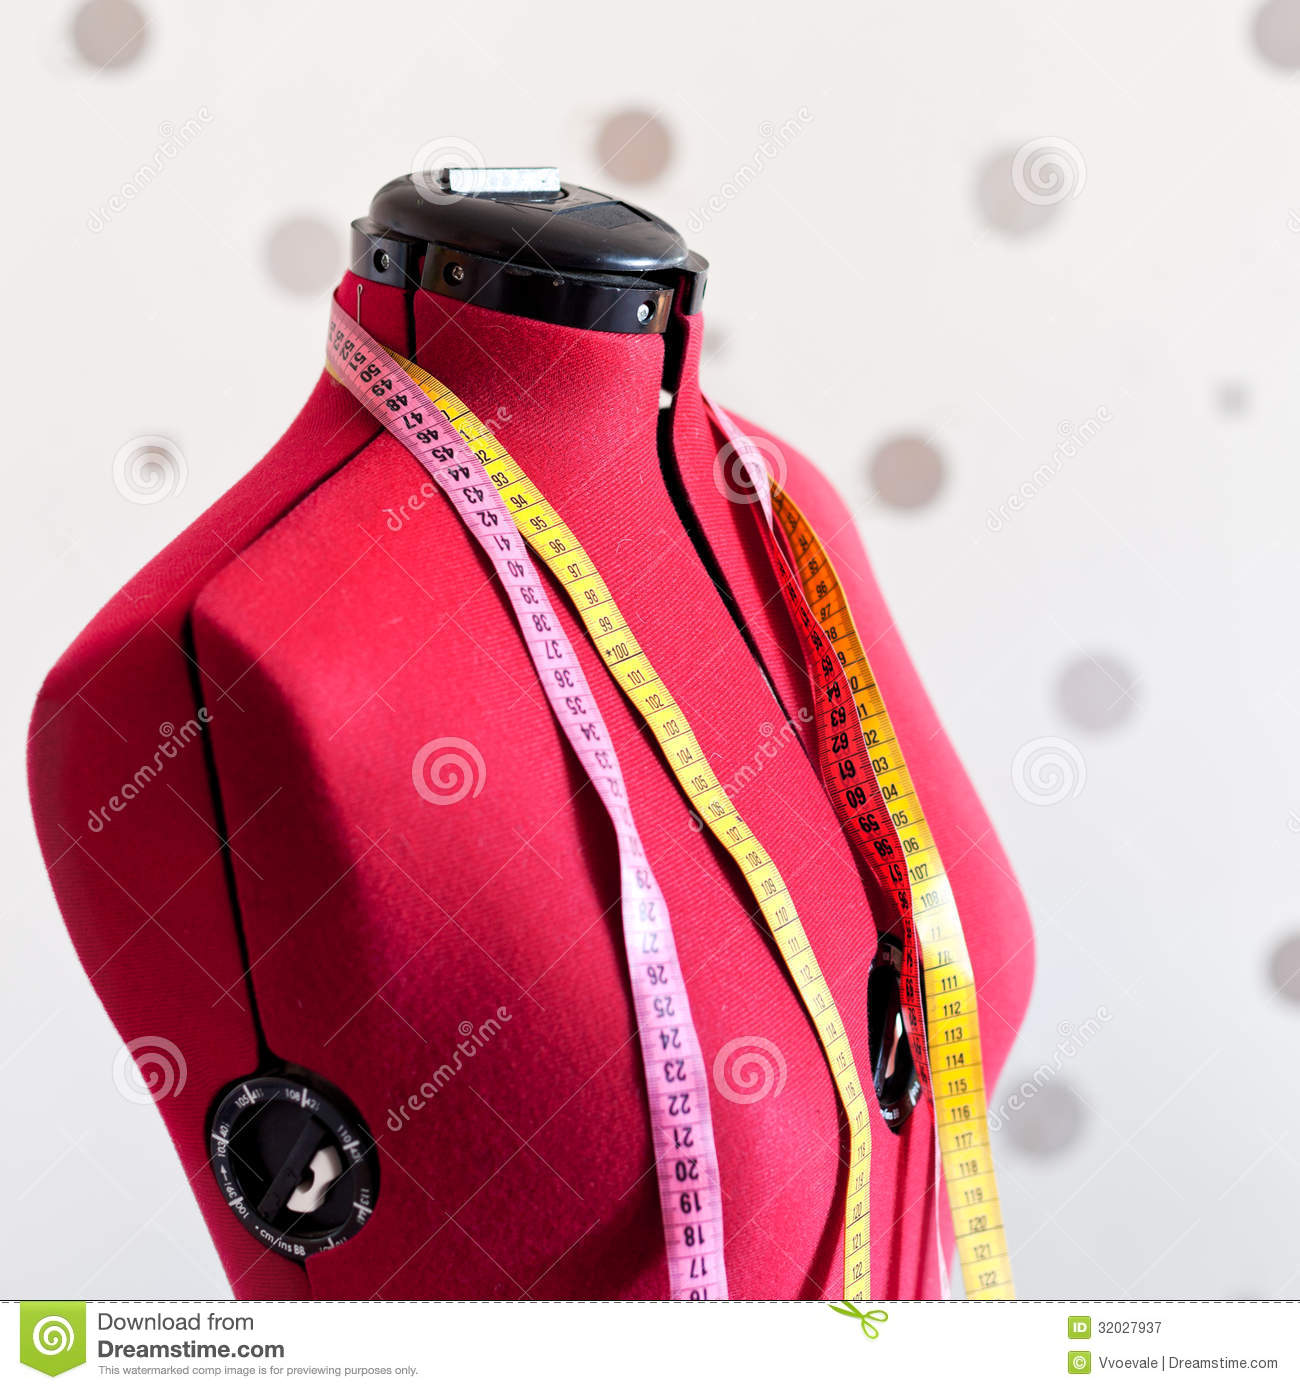 Red Tailors Dummy Royalty Free Stock Photography   Image  32027937